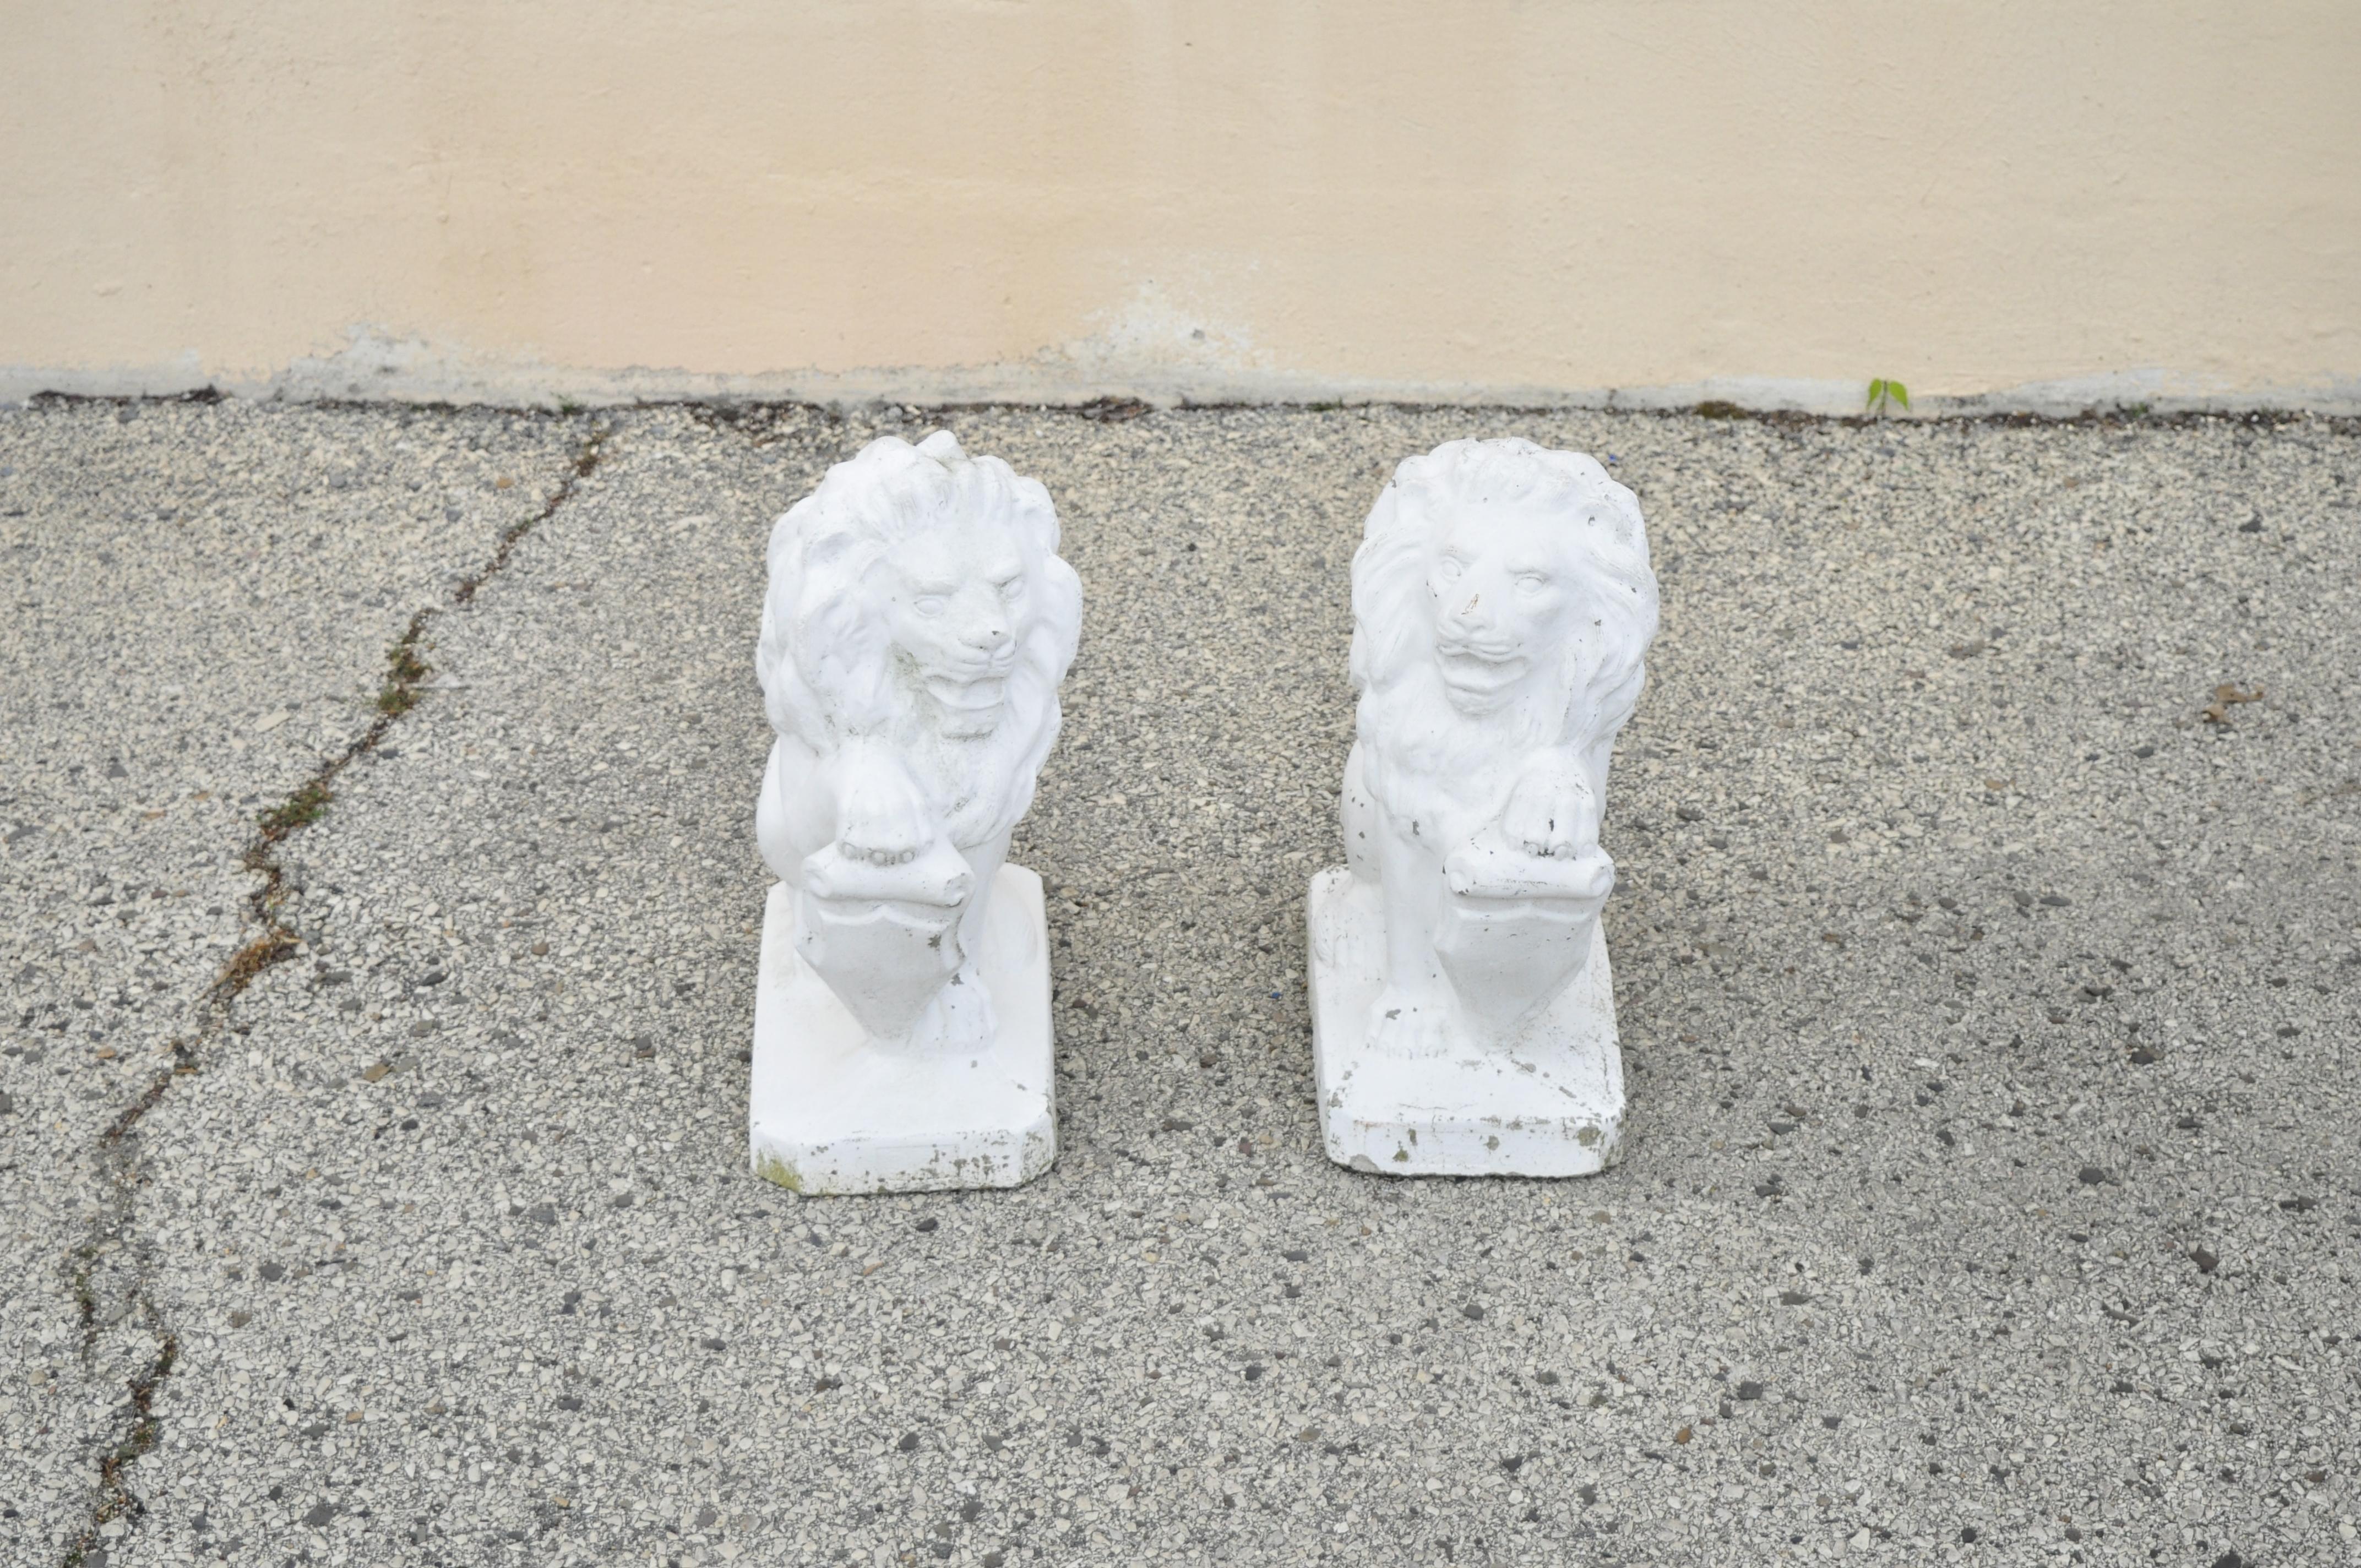 Vintage Italian Classical small lion and shield concrete lawn ornaments garden sculpture - a pair. Item features nice smaller size, lion forms with paw resting on shield, left and right facing, Circa mid 20th century. Measurements: 19